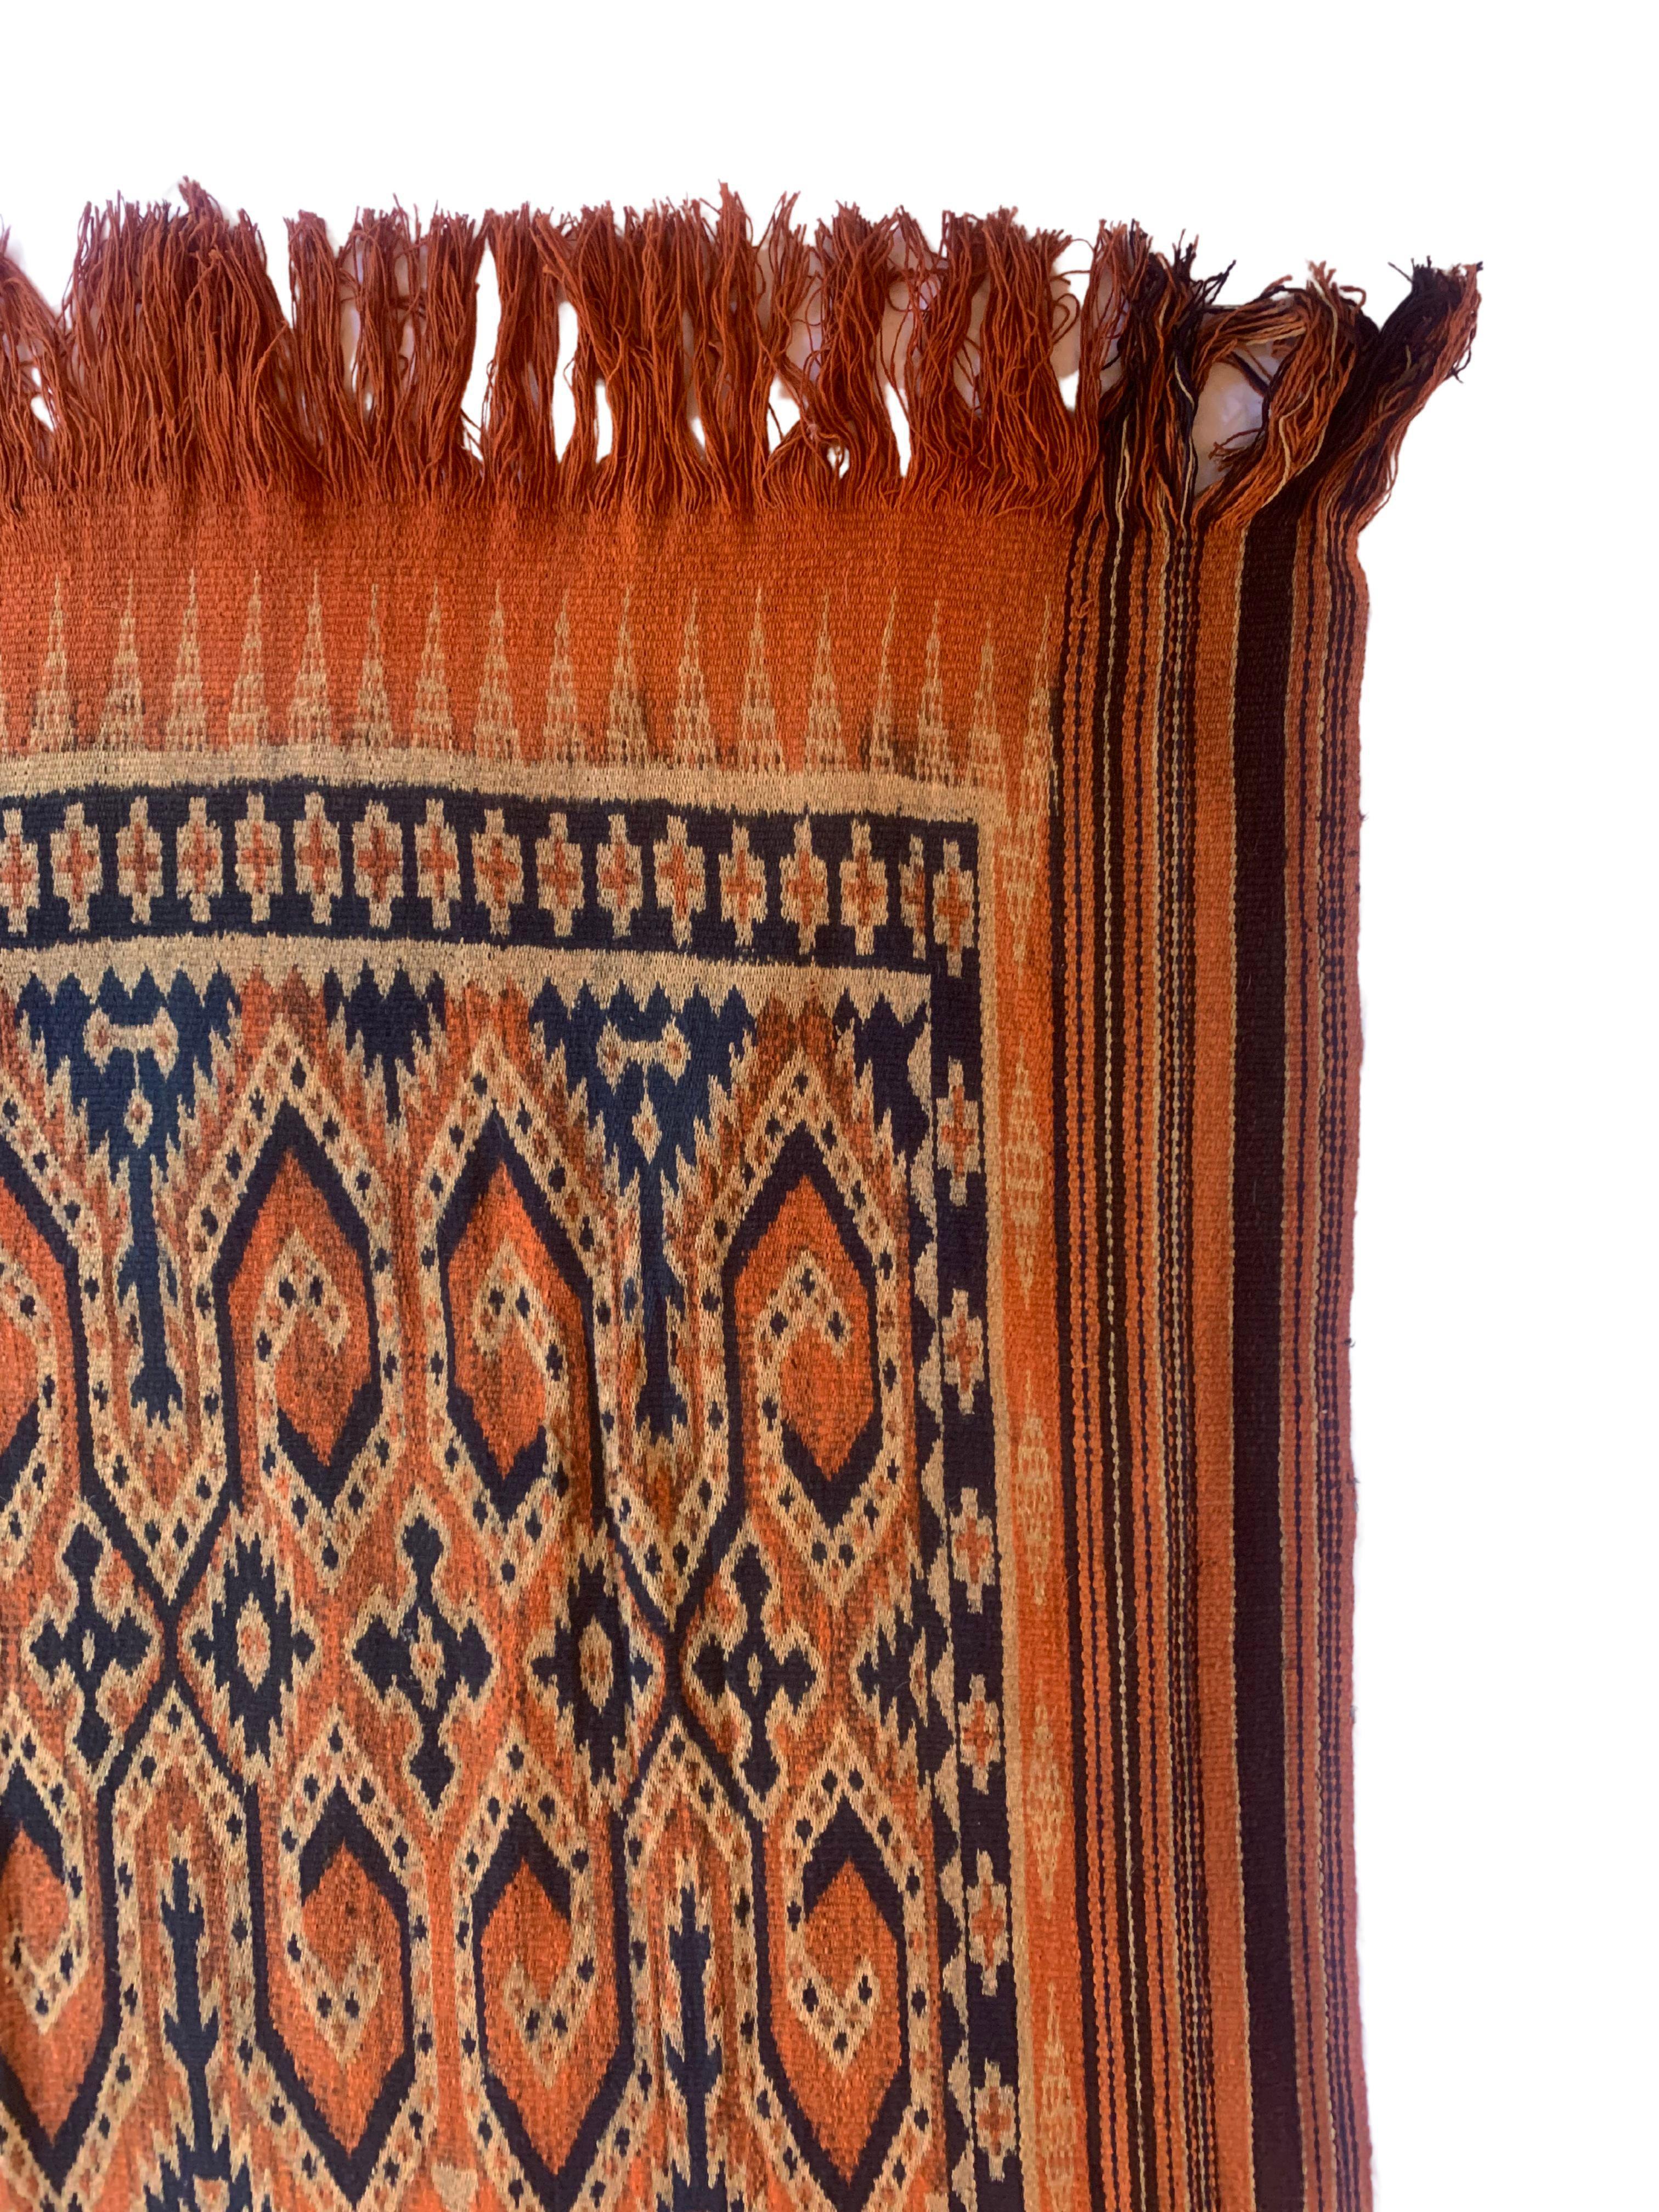 Ikat Textile from Toraja Tribe of Sulawesi with Stunning Tribal Motifs C. 1950 In Good Condition For Sale In Jimbaran, Bali